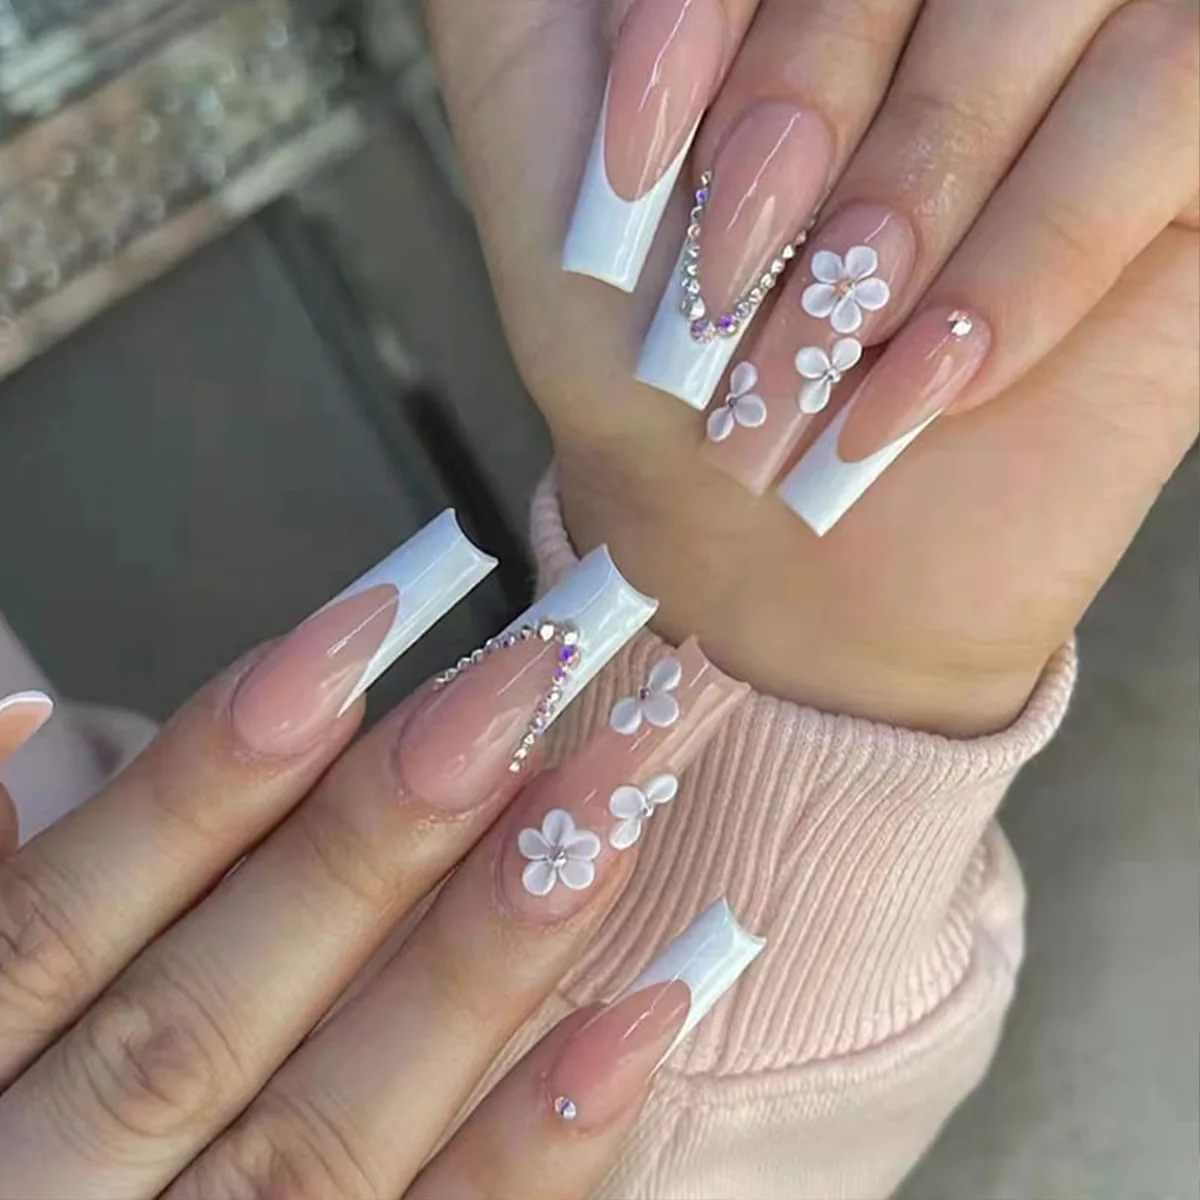 

3D fake nails accessories long french coffin tips nude white flowers with diamond designs faux ongles press on false nail set